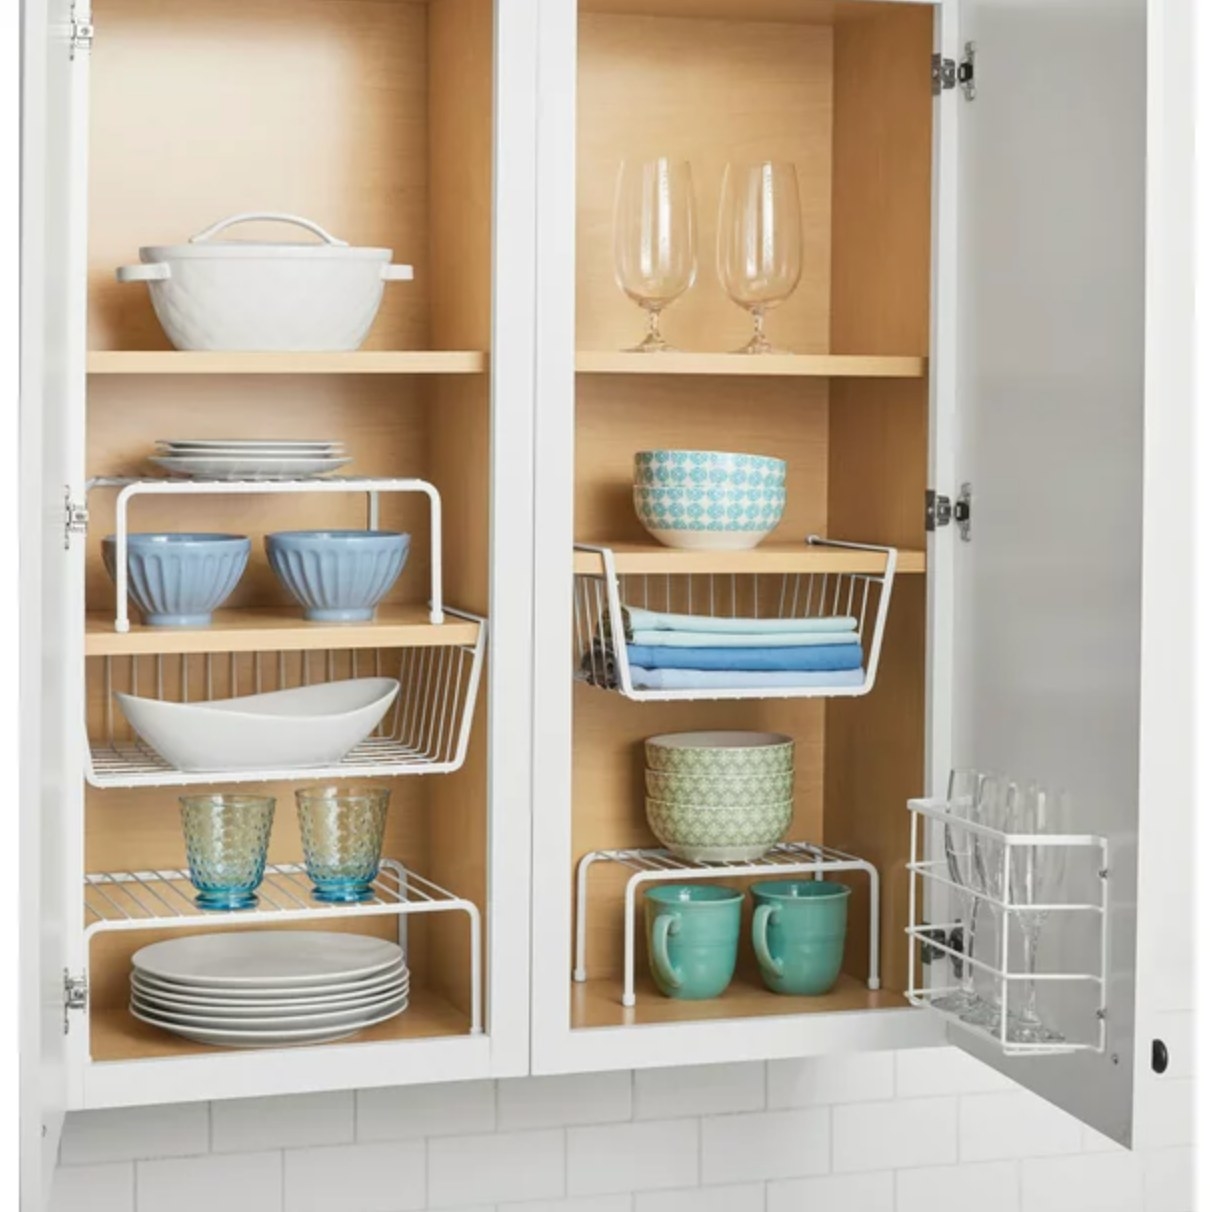 the white wire shelves and hanging bins in a decorated cabinet space with blue and white dishware